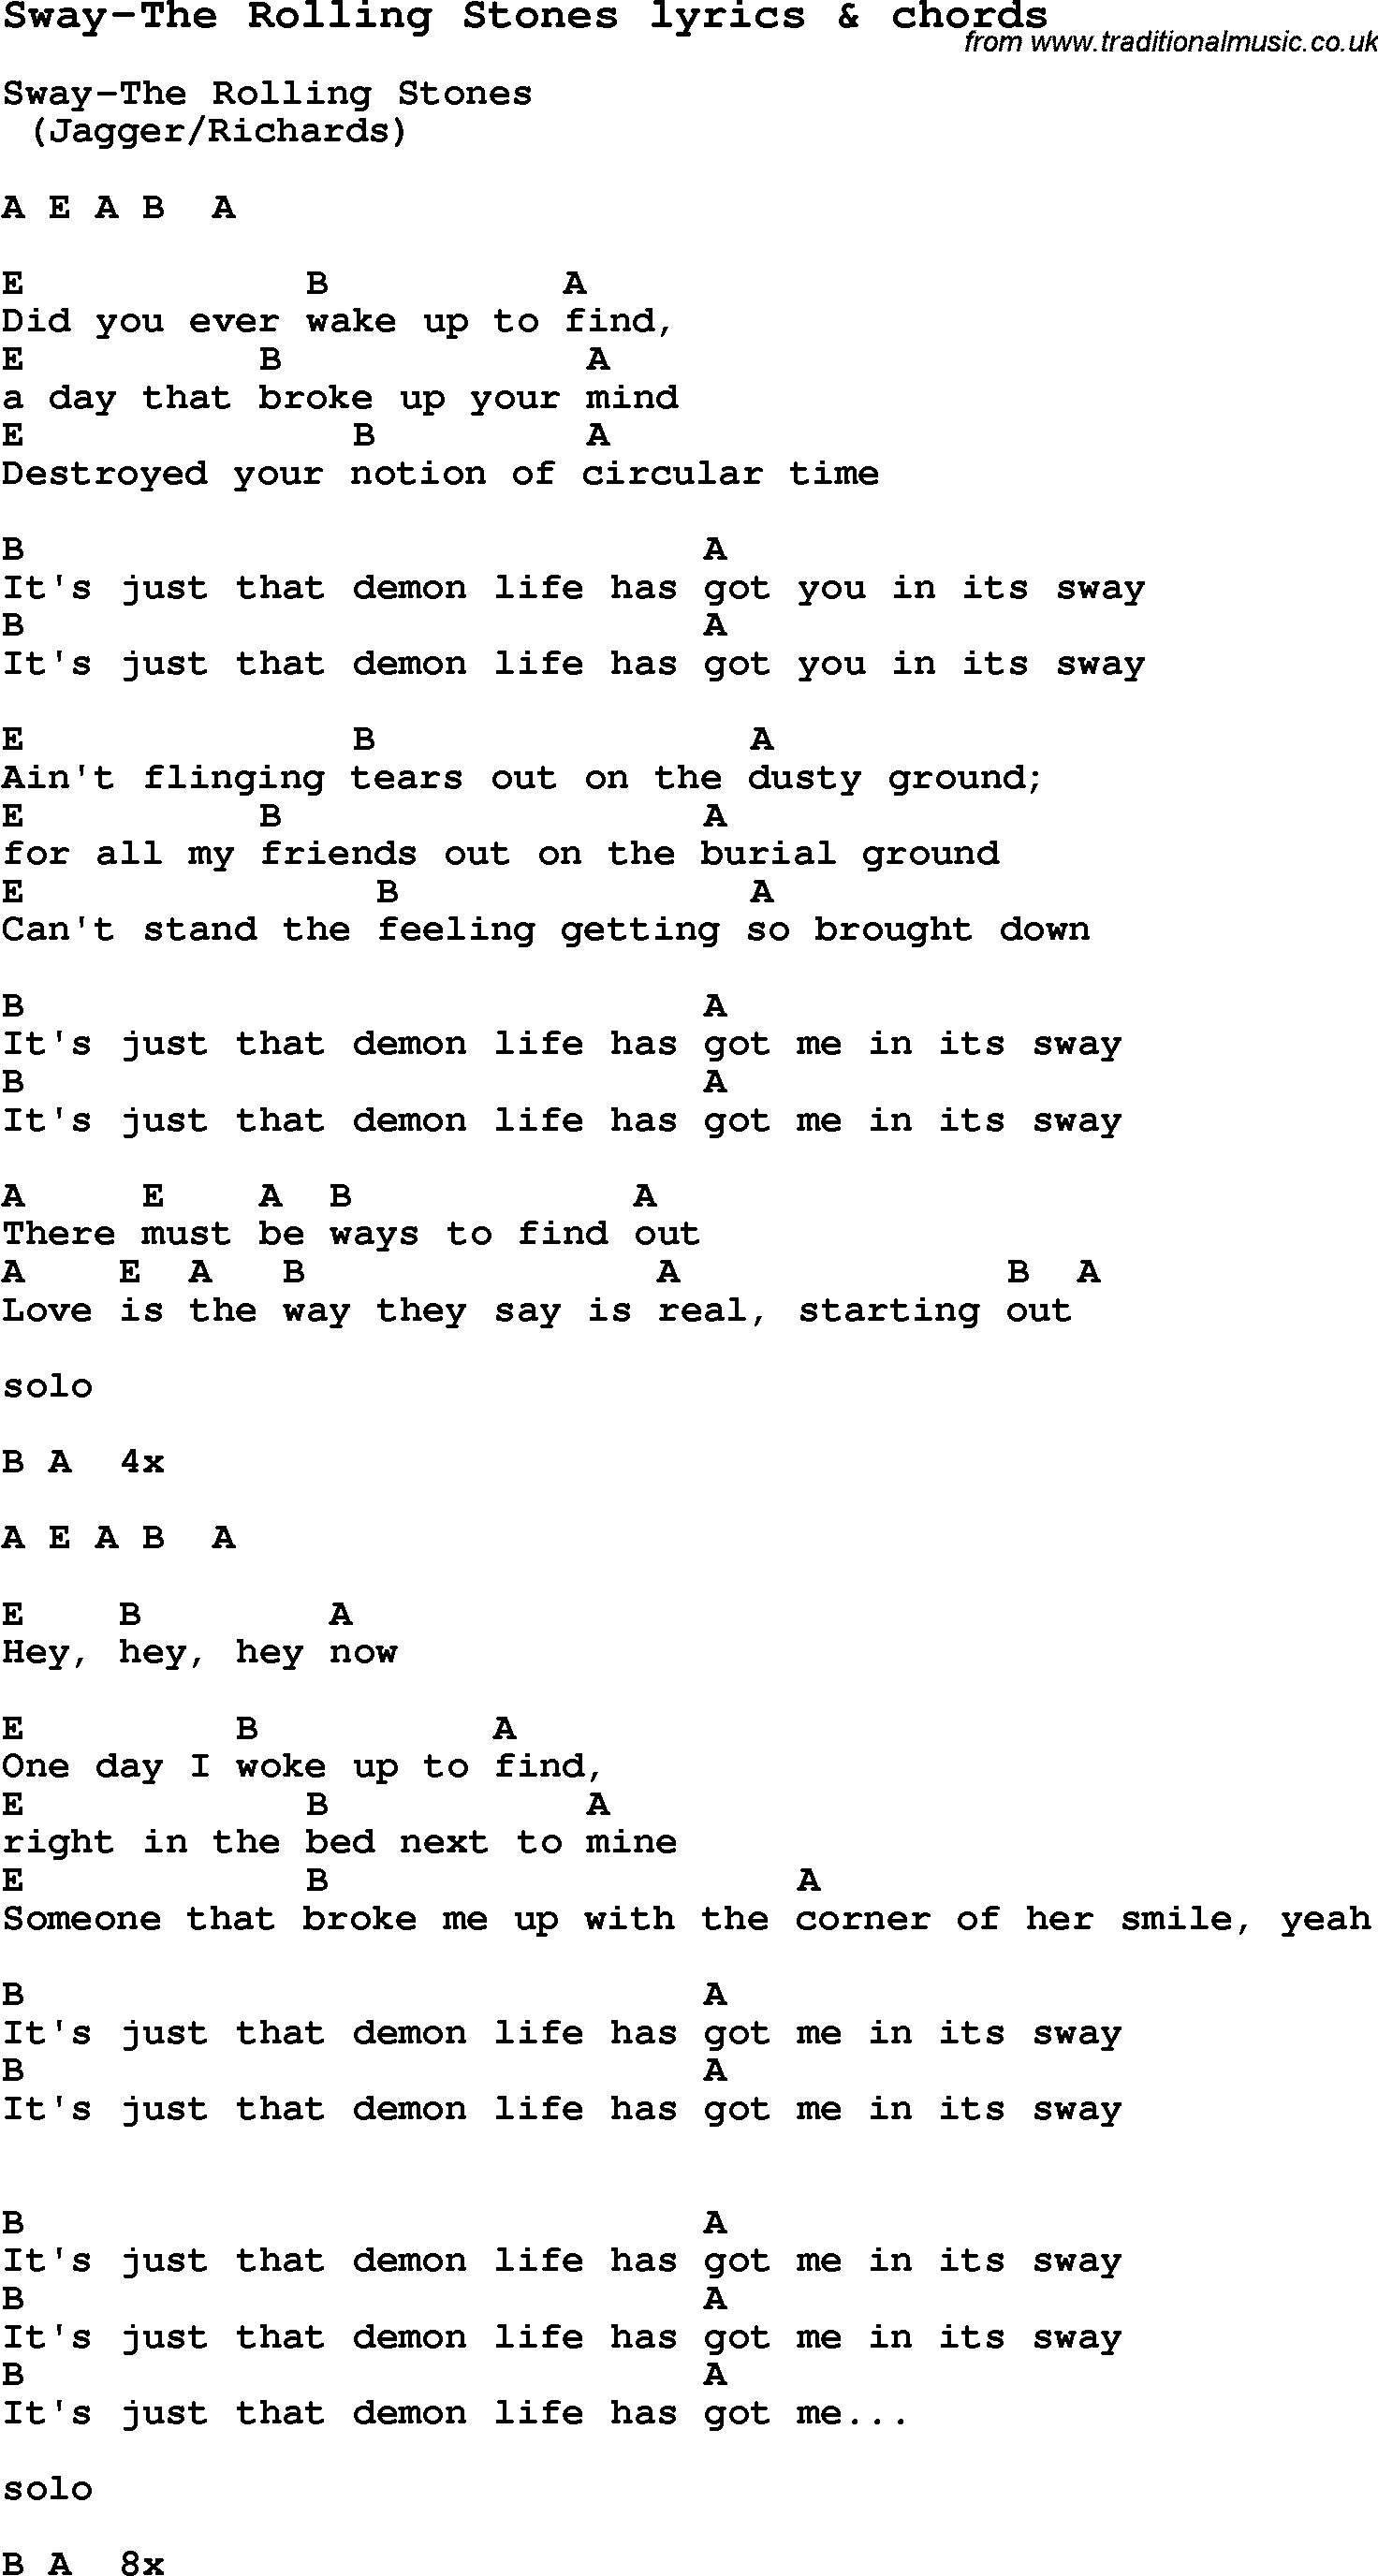 Love Song Lyrics For Sway The Rolling Stones With Chords G don't get too close. traditional music library